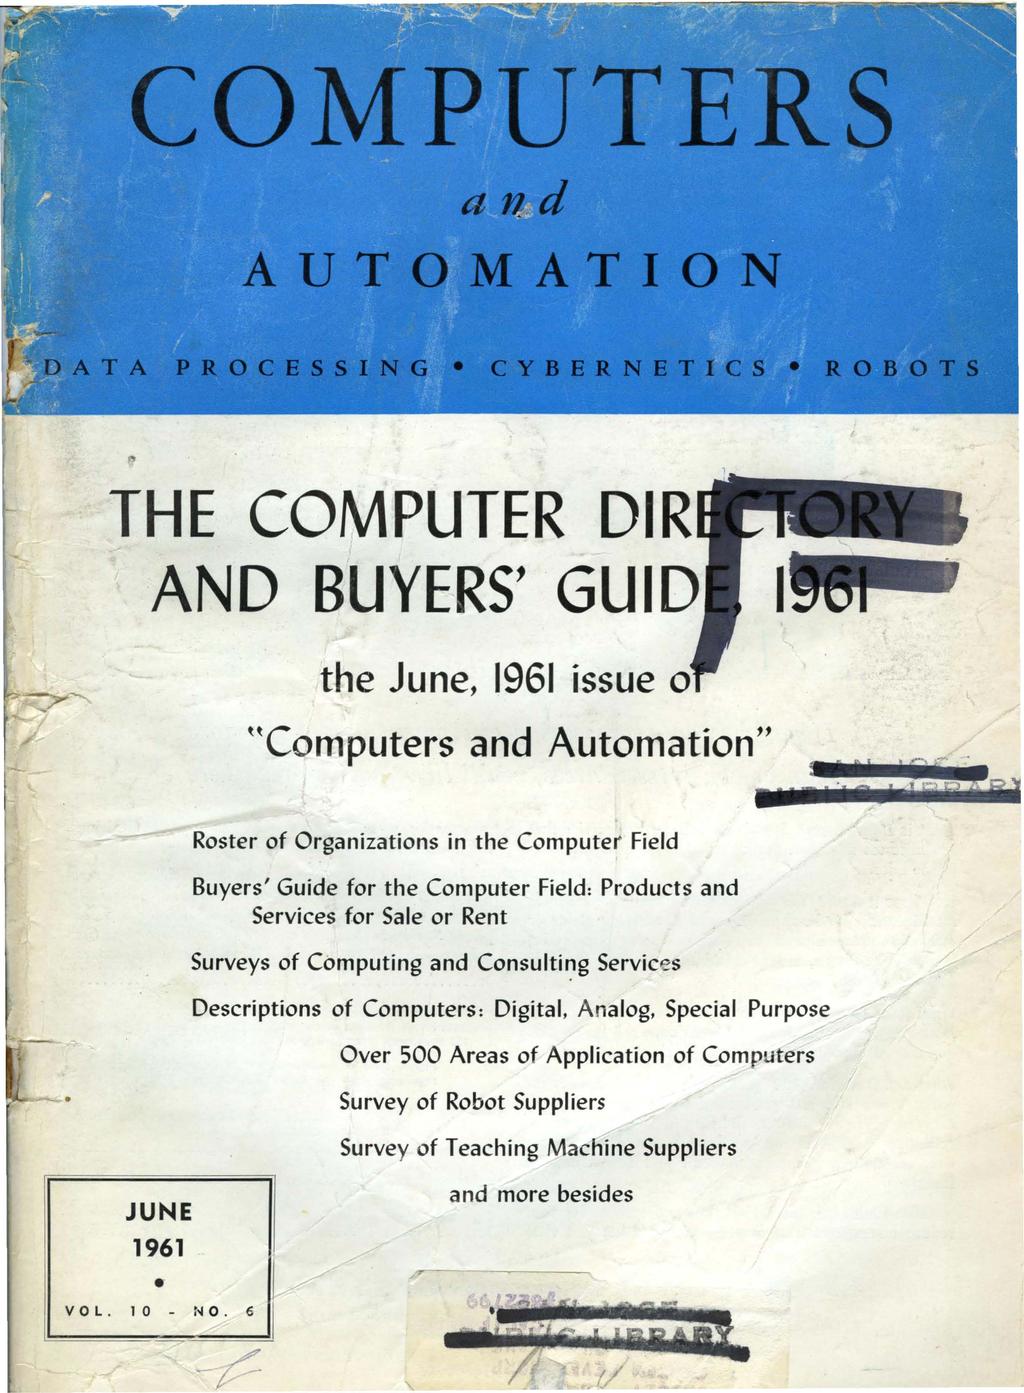 THE COMPUTER DIR AND BUYERS' GUID the June, 1961 issue 0 HComputers and Automation" Roster of Organizations in the Computer Field Buyers' Guide for the Computer Field: Products and Services for Sale